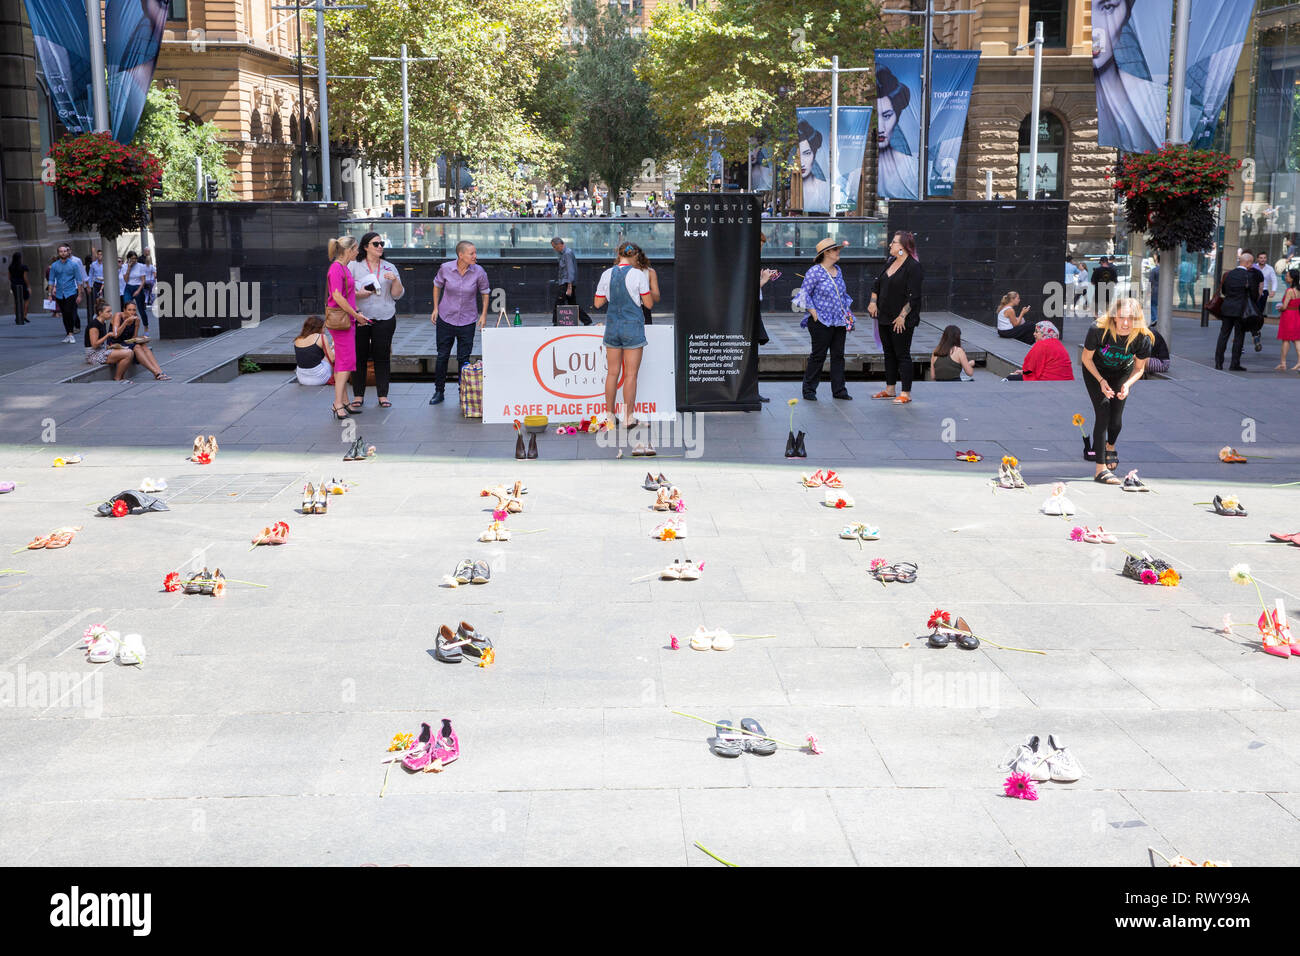 Sydney, Australia. 8th Mar, 2019. Lou's place is a refuge for women in Kings Cross, Sydney. Here in Martin Place is placed one pair of womens shoes that represent each woman who died in 2018 as a result of domestic violence in Australia, Martin Place, Sydney city centre, Australia. Friday 8th March 2019. Credit: martin berry/Alamy Live News Stock Photo